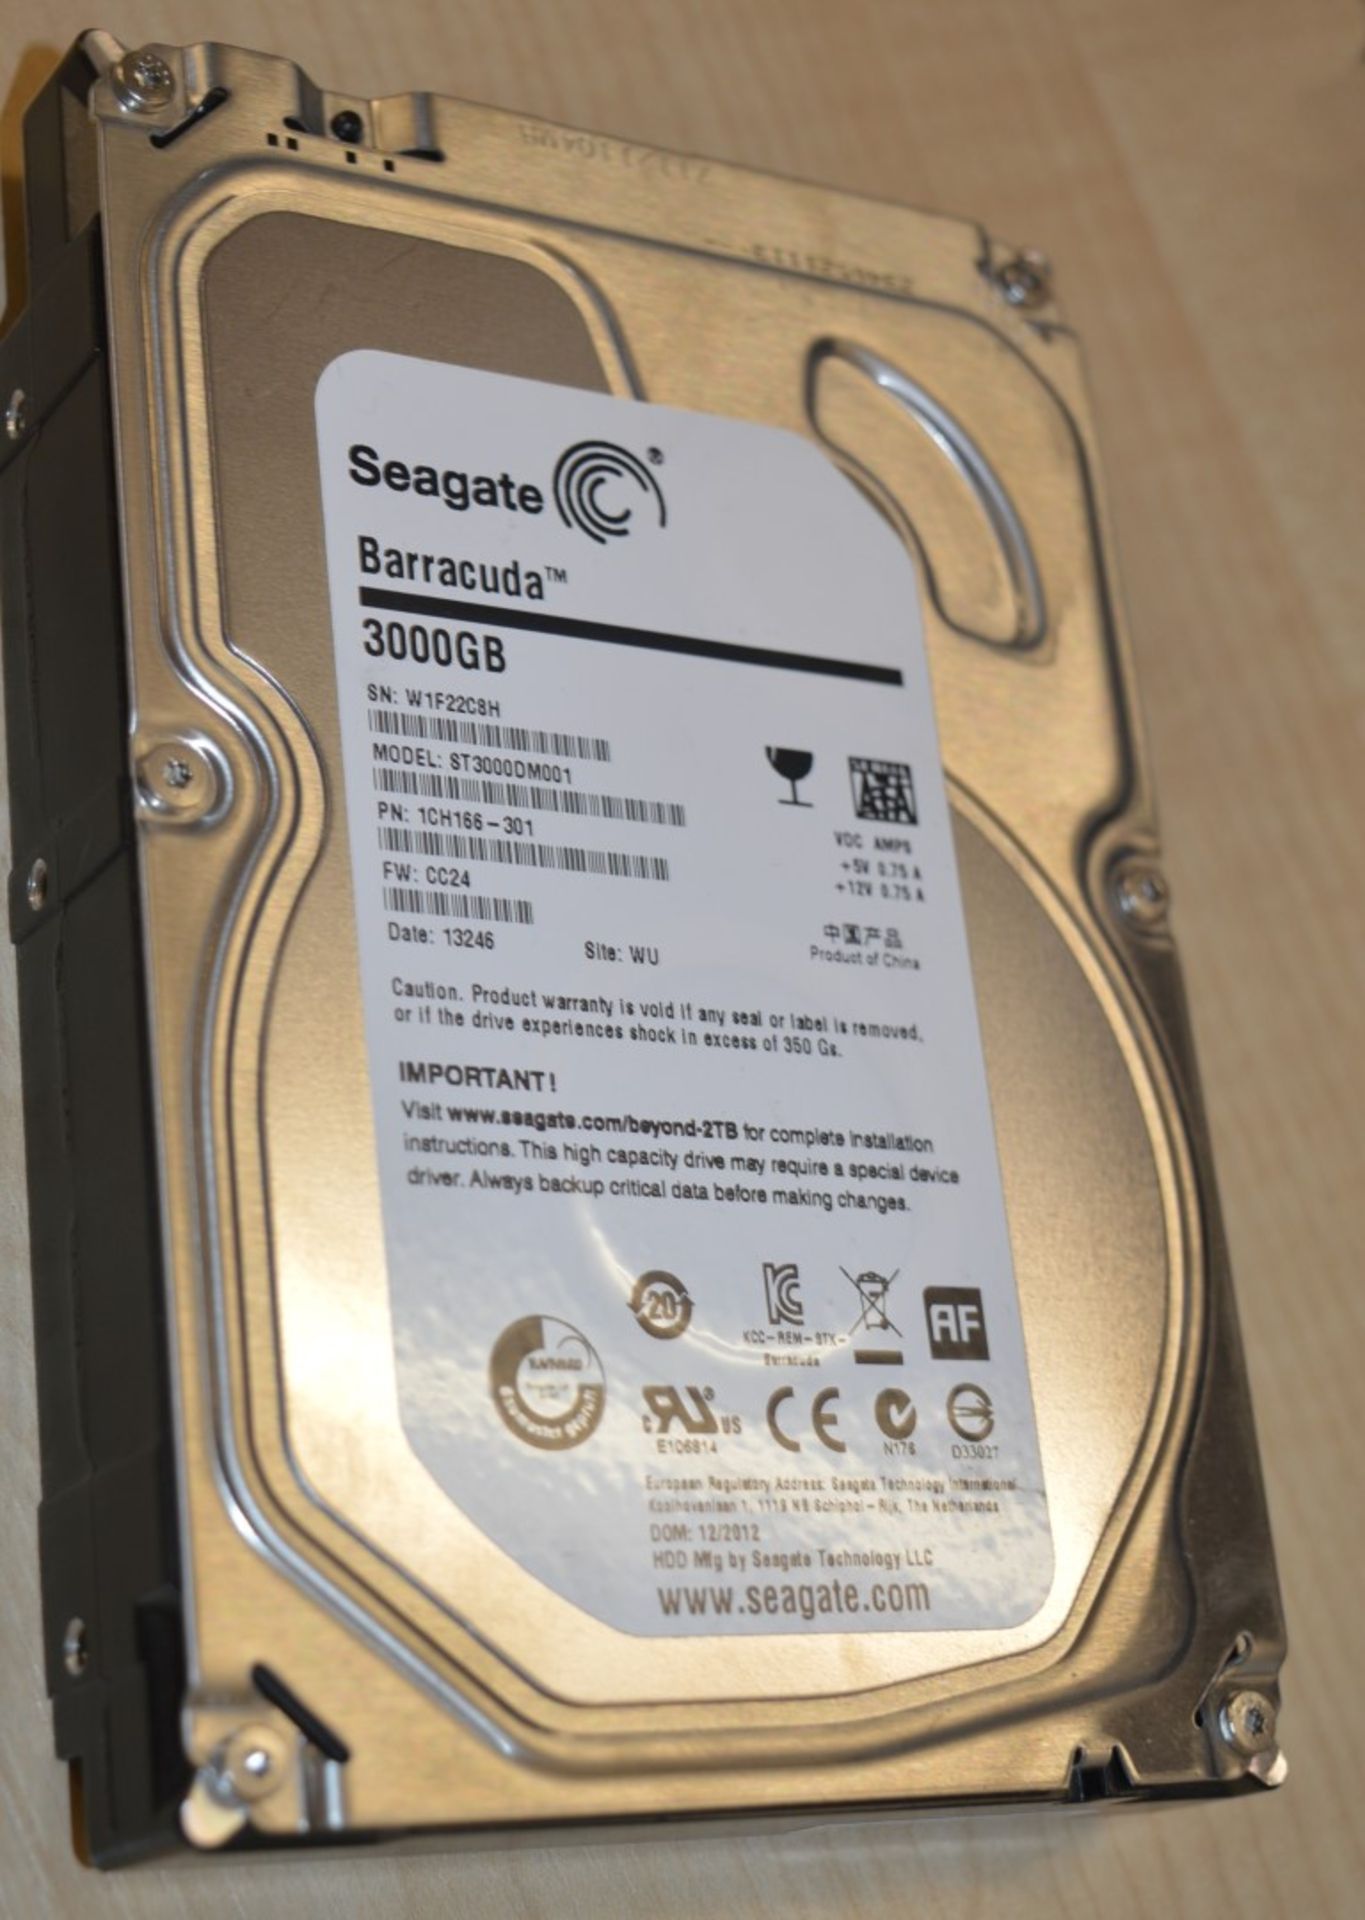 1 x Seagate Barracude 3000gb (3TB) - Hard Drisk Drive - 3.5" Suitable For Desktop Computers - Tested